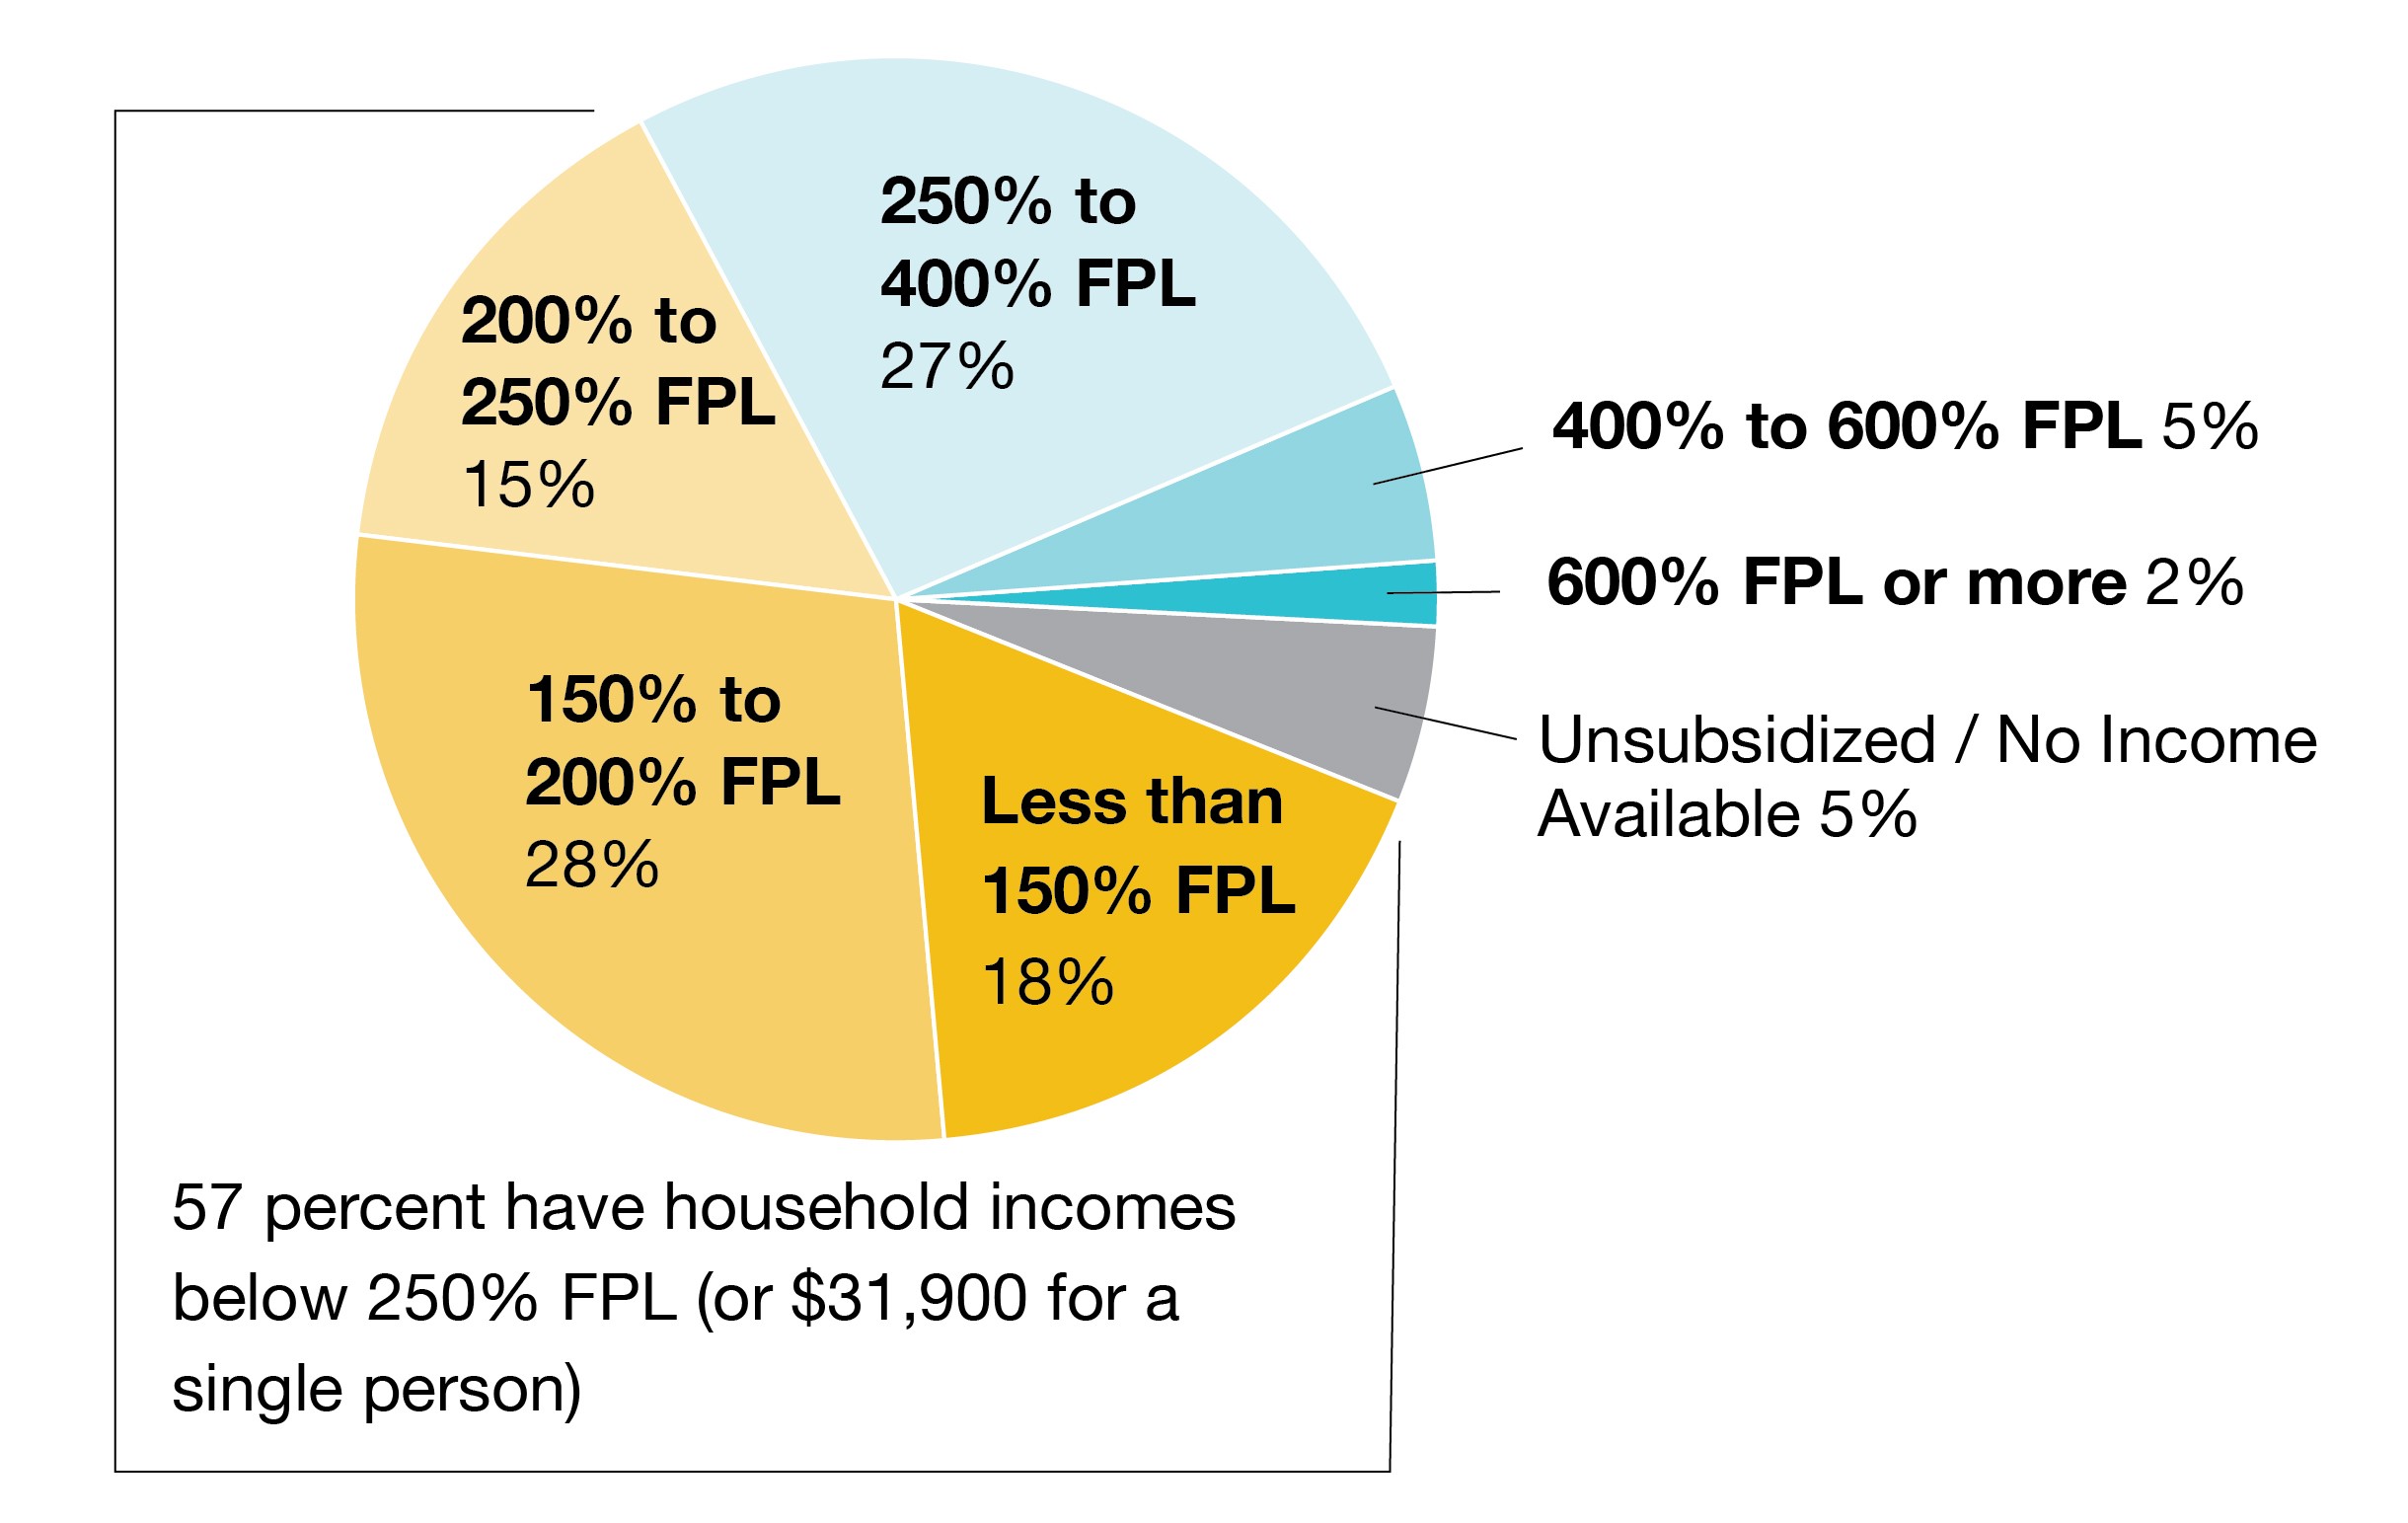 Plan selections by income